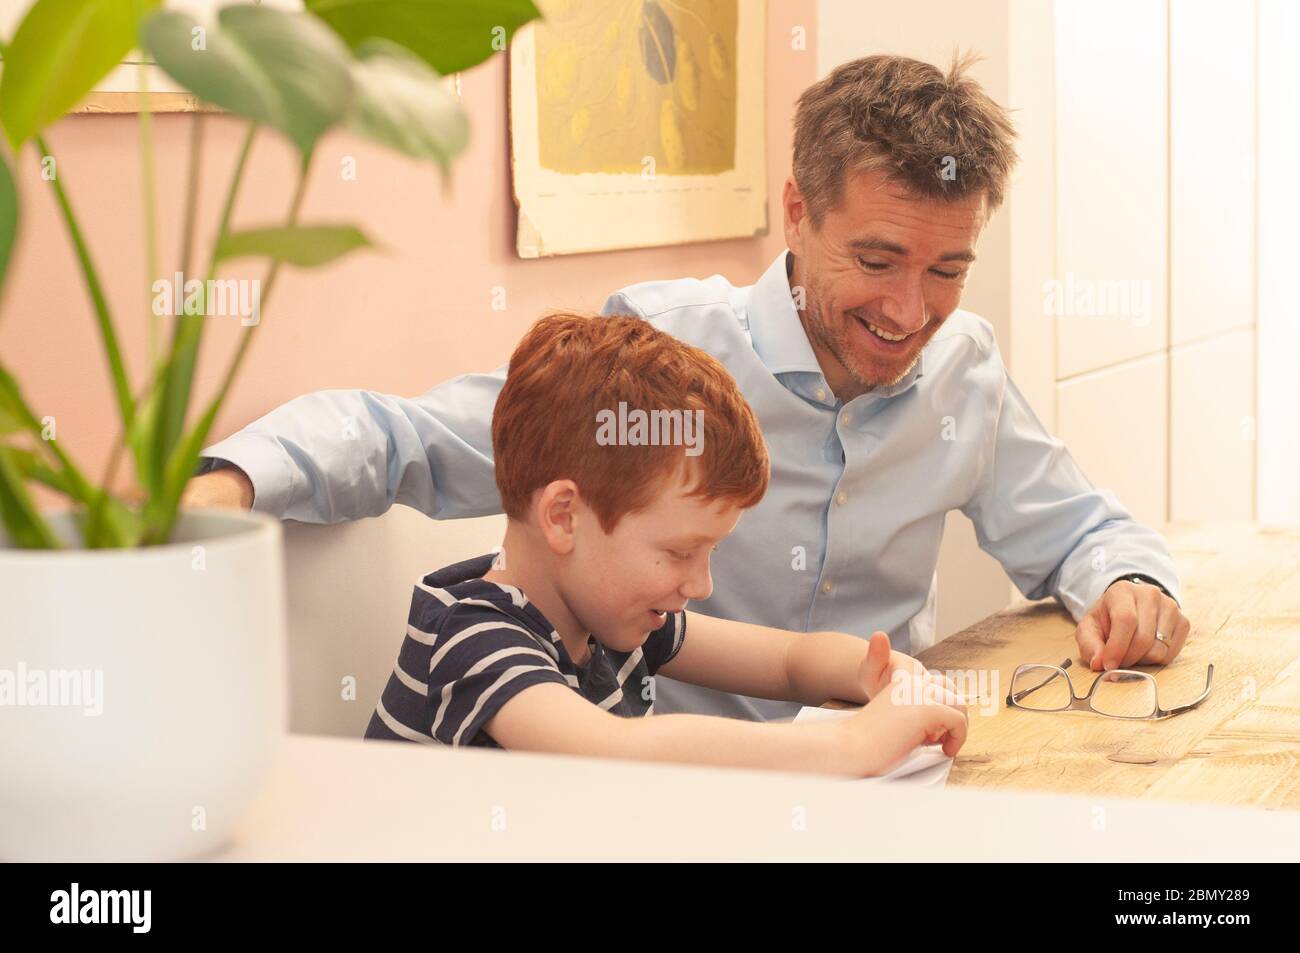 Dad helping pre-teen boy with his school work at home during homeschooling due to the coronavirus lockdown. Landscape format. Stock Photo